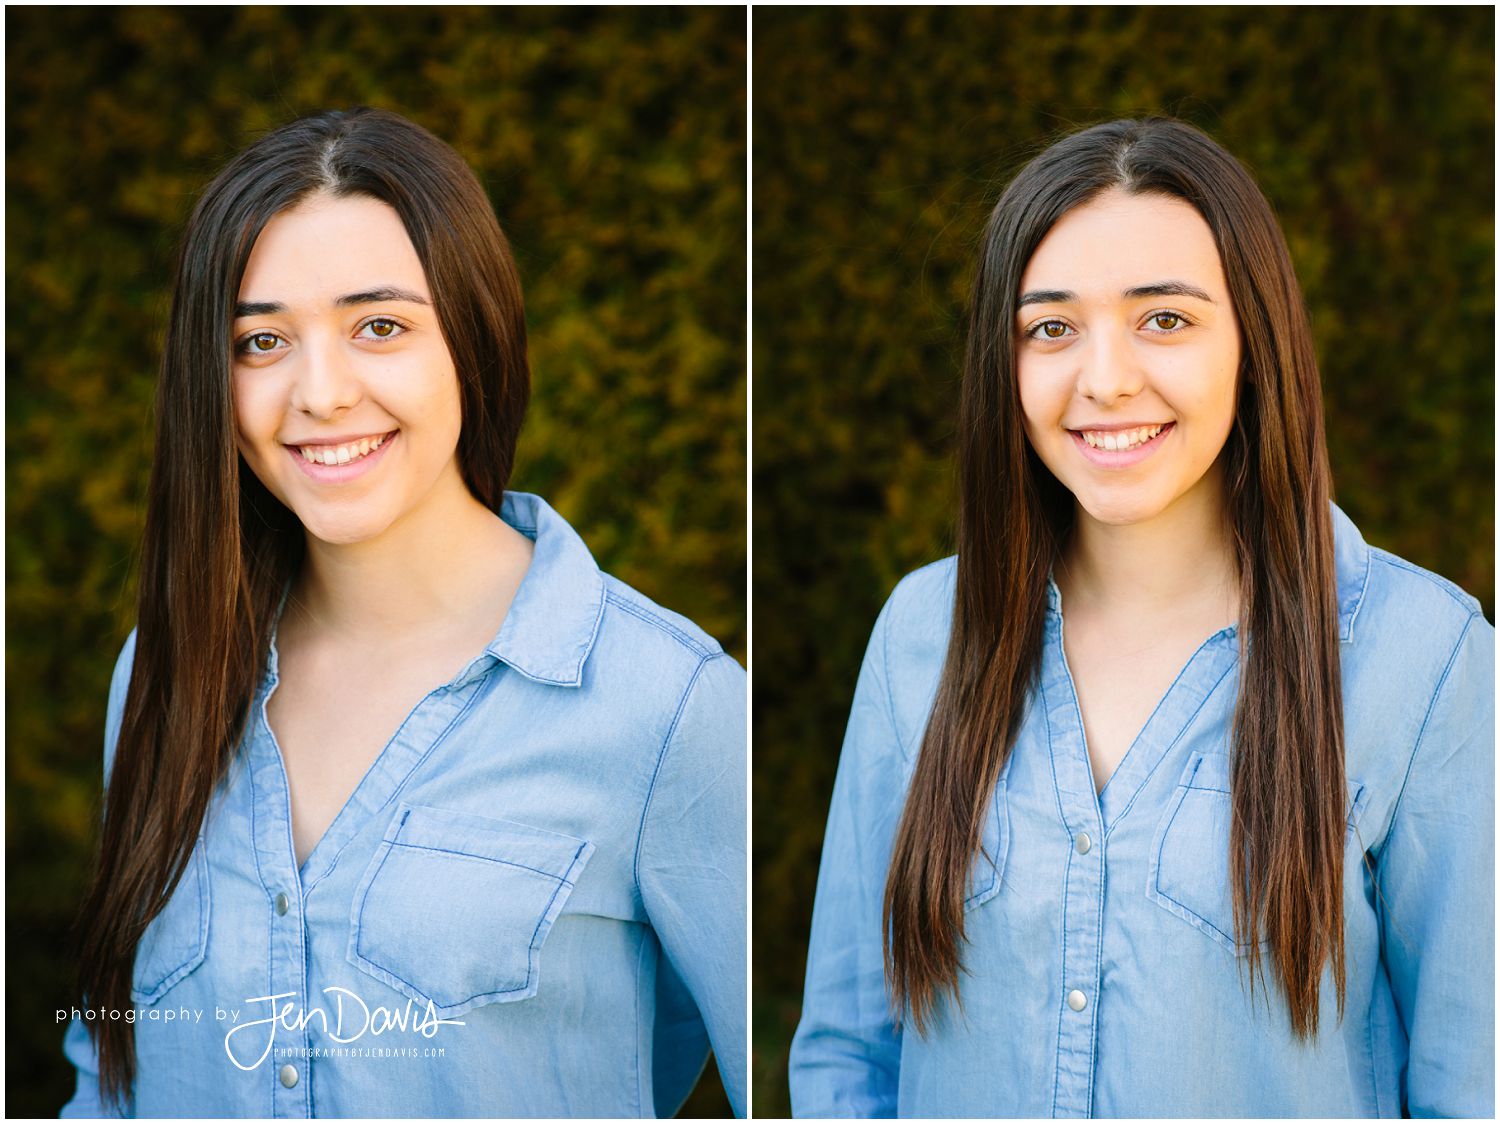 How to style hair for a head shot in princeton